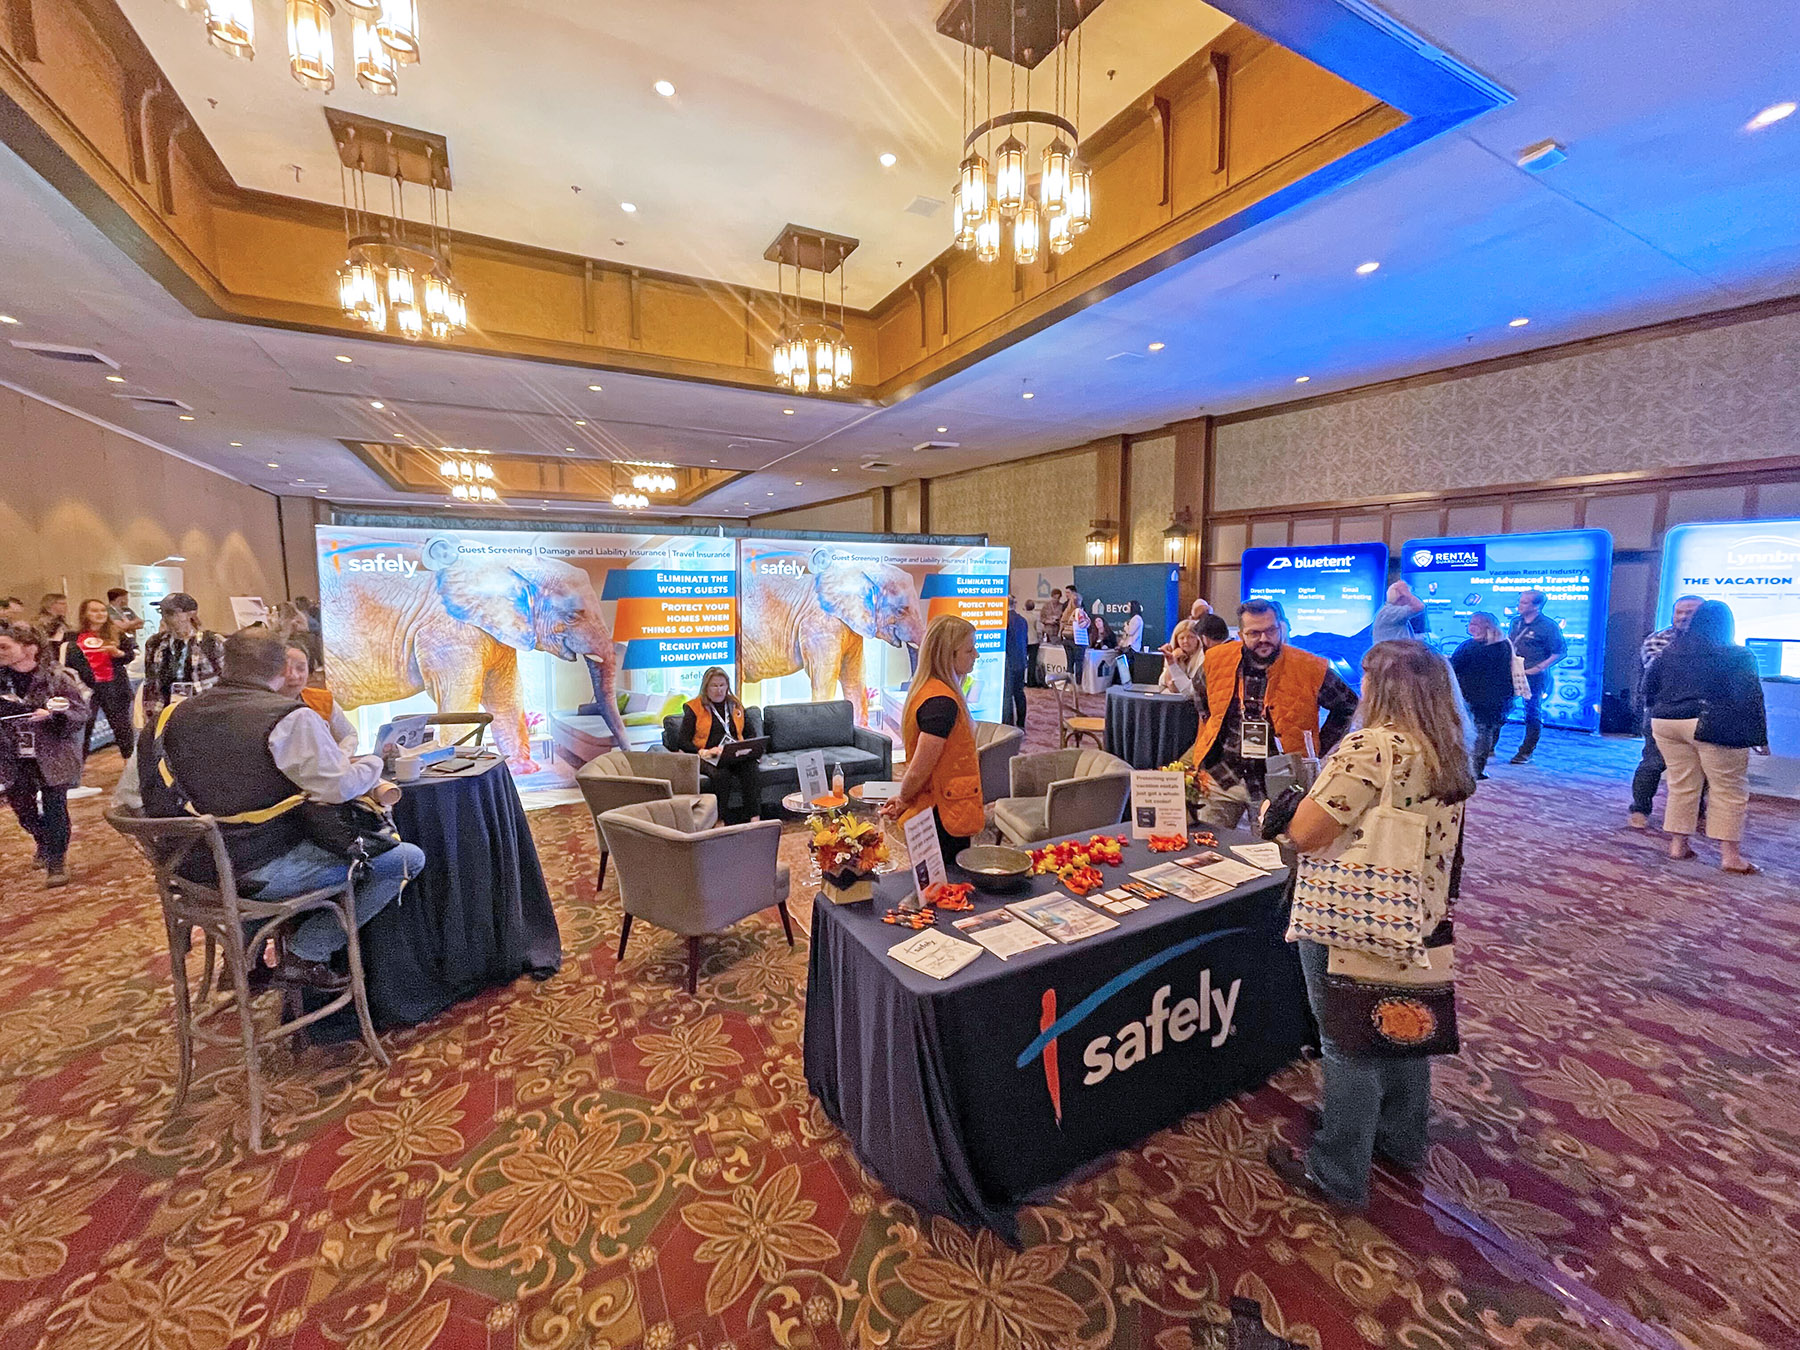 Top U.S. Short-Term Rental Trade Shows and Conferences for Property Managers